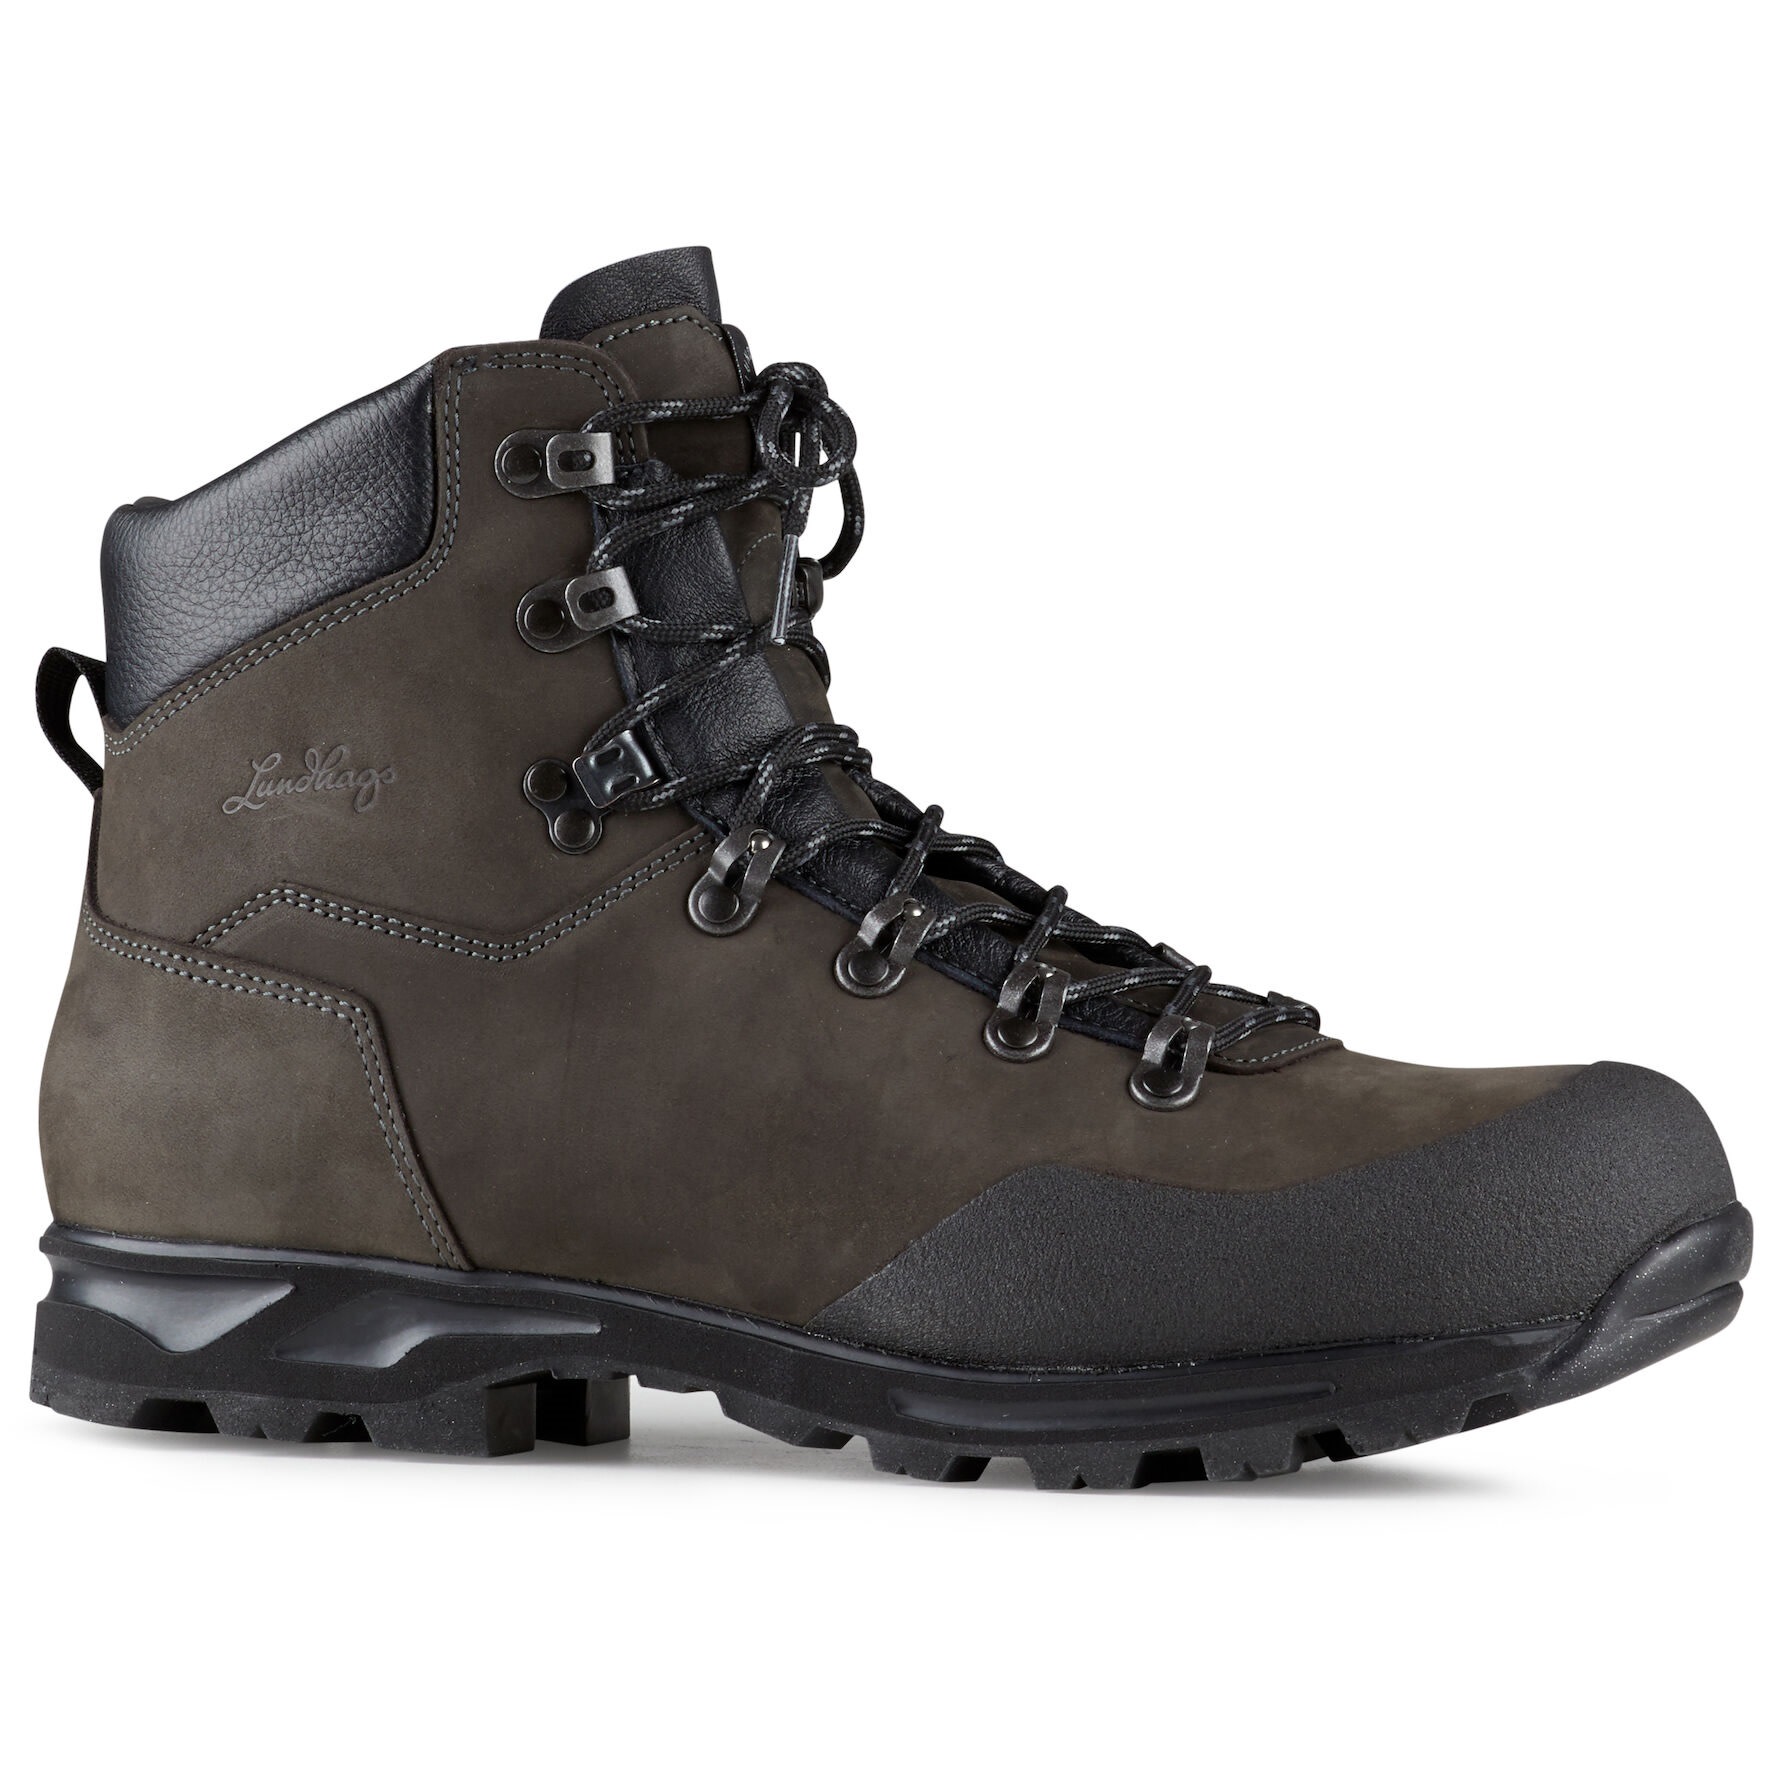 Lundhags Unisex Stuore Insulated Mid Ash